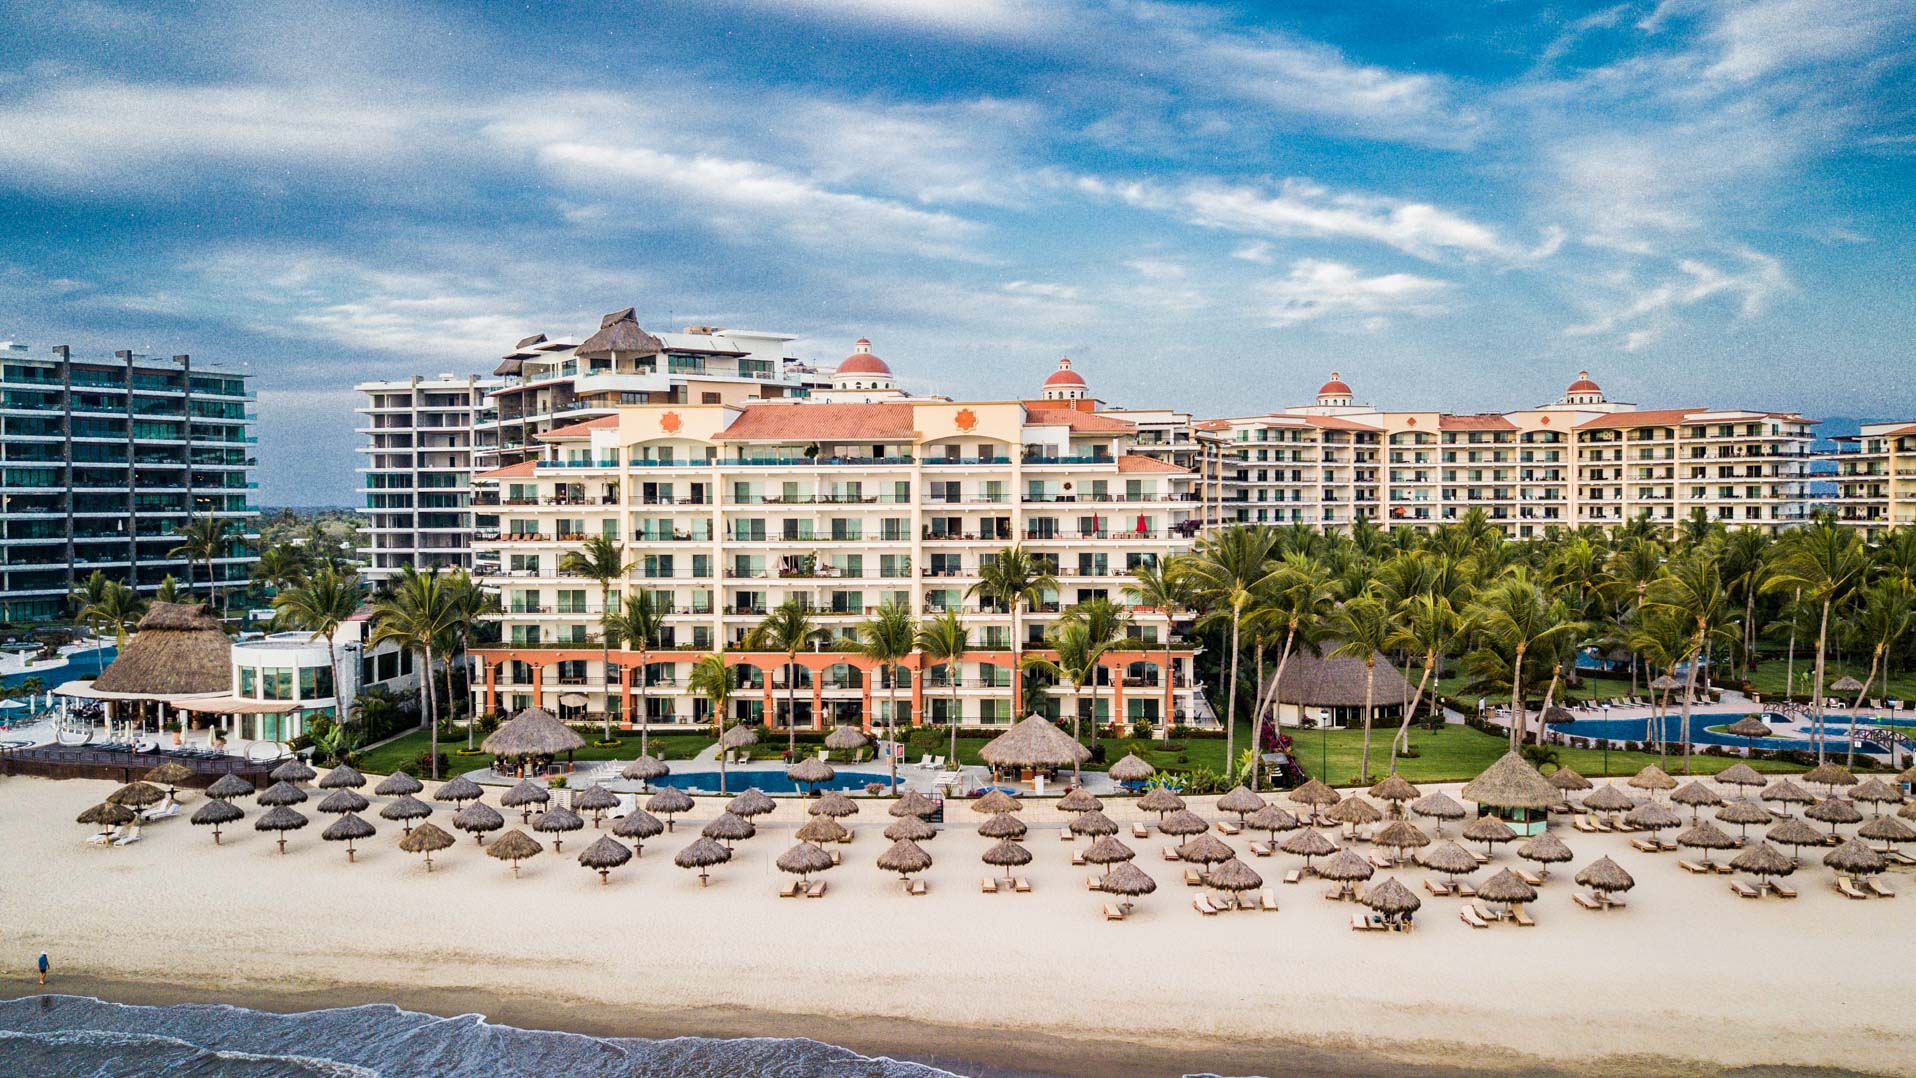 An awe-inspiring aerial photograph of Playa Royale Residences on a sun-drenched day. This captivating image offers a bird's-eye view of the resort, showcasing its proximity to the glistening white sand beaches. Beach chairs and colorful umbrellas dot the shoreline, providing shade for guests seeking refuge from the sun's rays